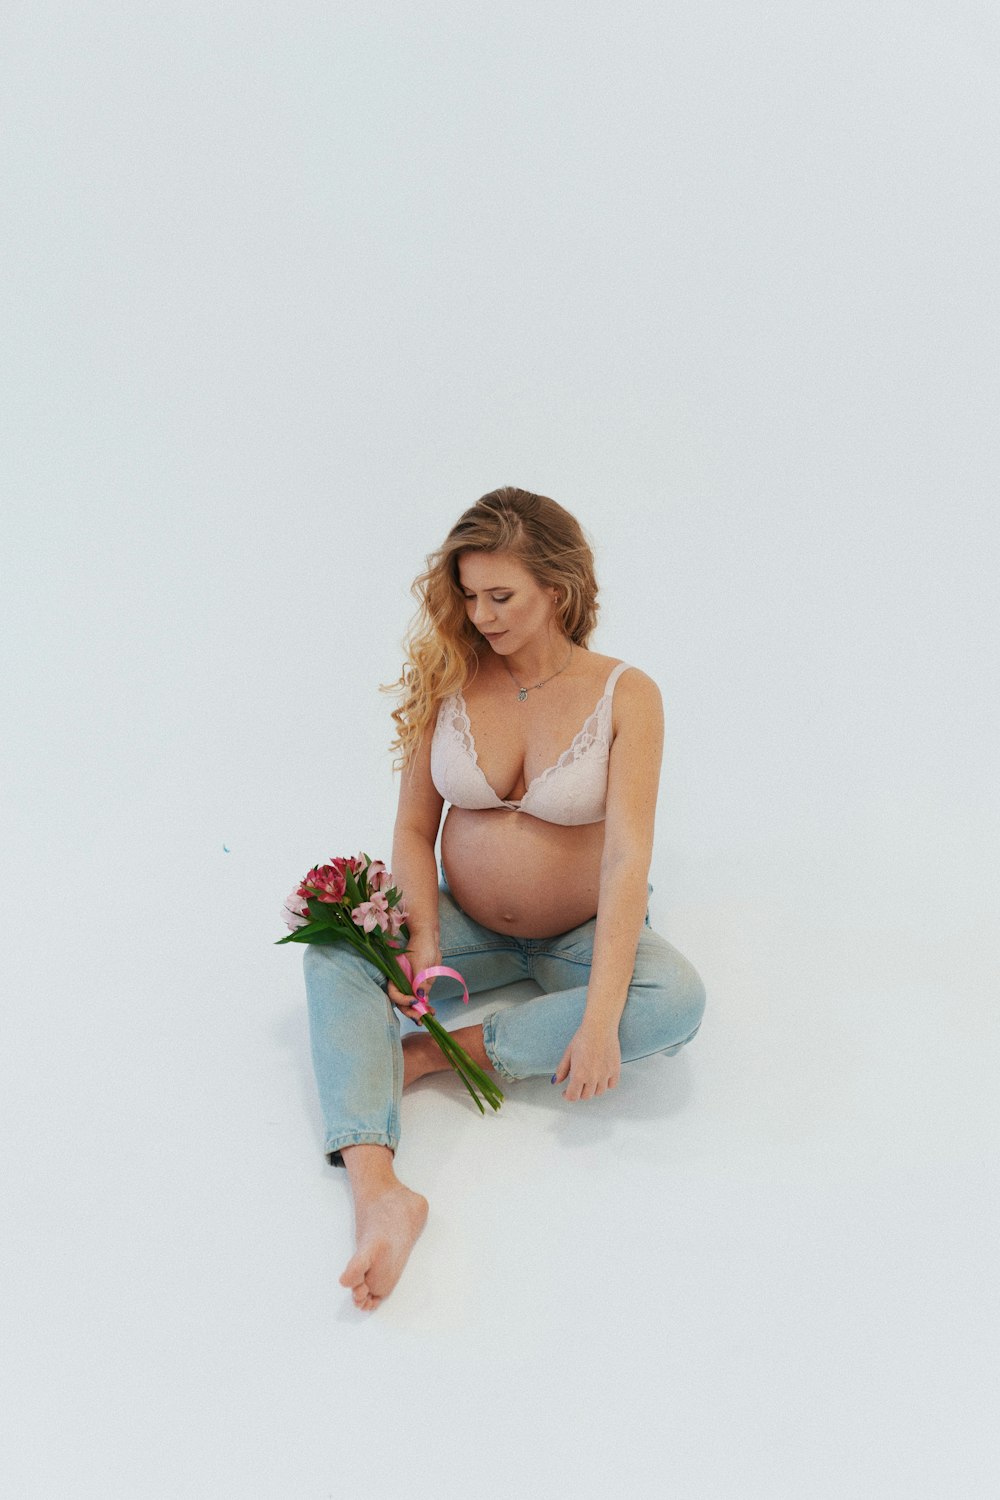 a pregnant woman sitting on the ground with a bouquet of flowers